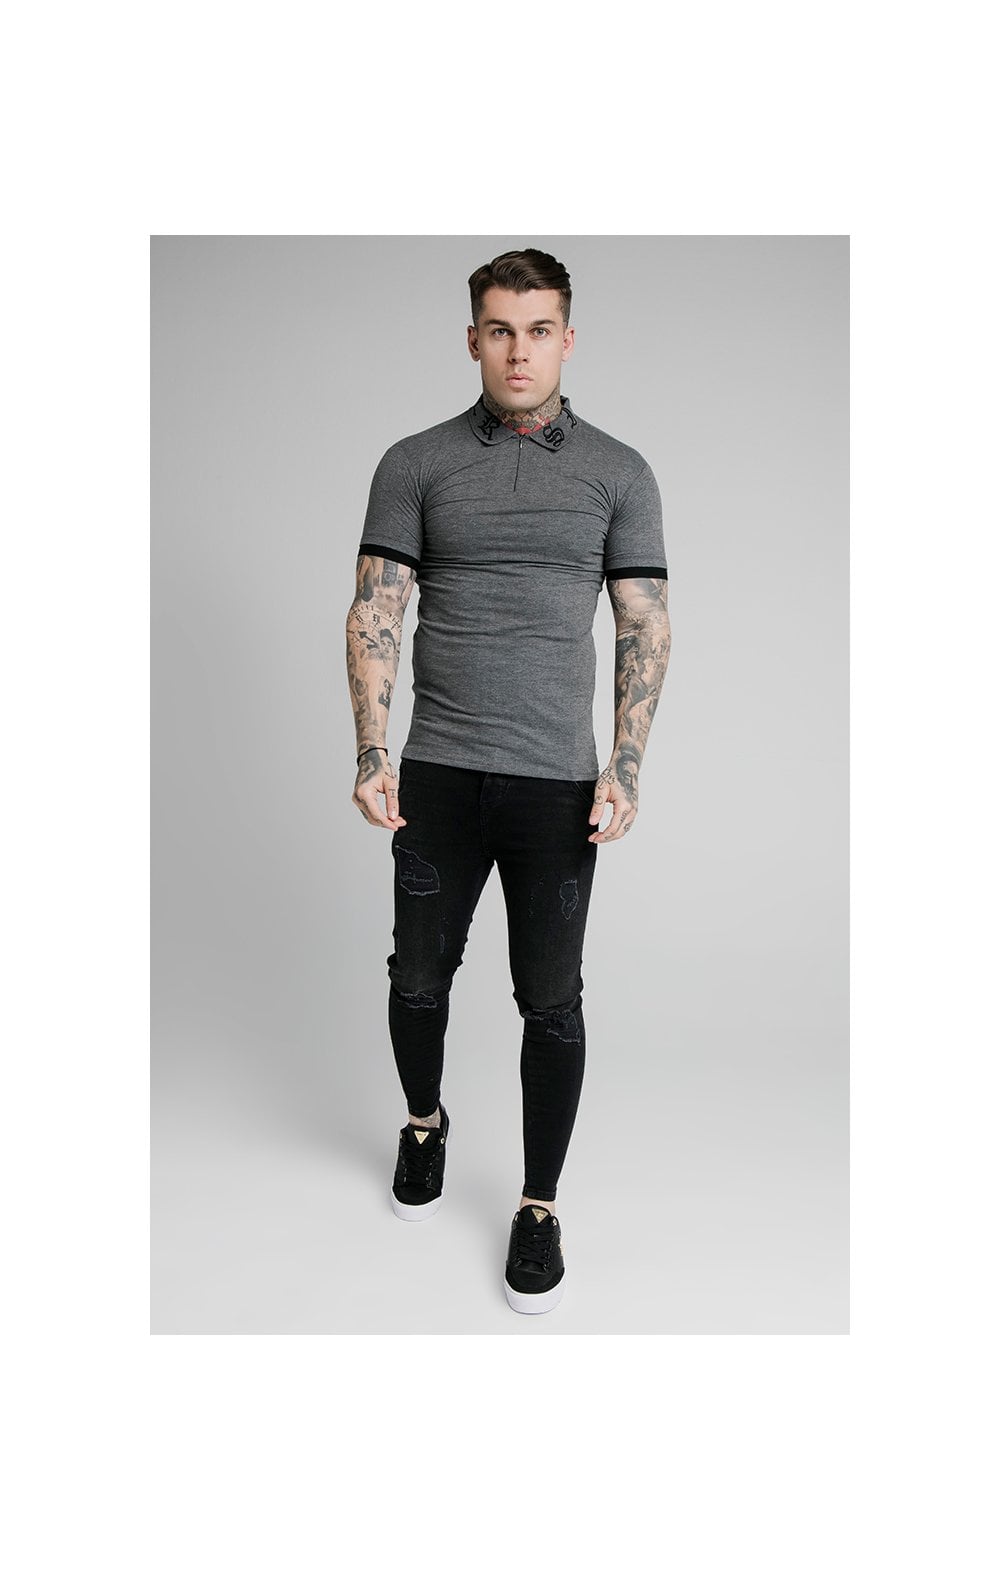 Load image into Gallery viewer, SikSilk S/S Old English Inset Cuff Polo - Dark Grey Marl (3)